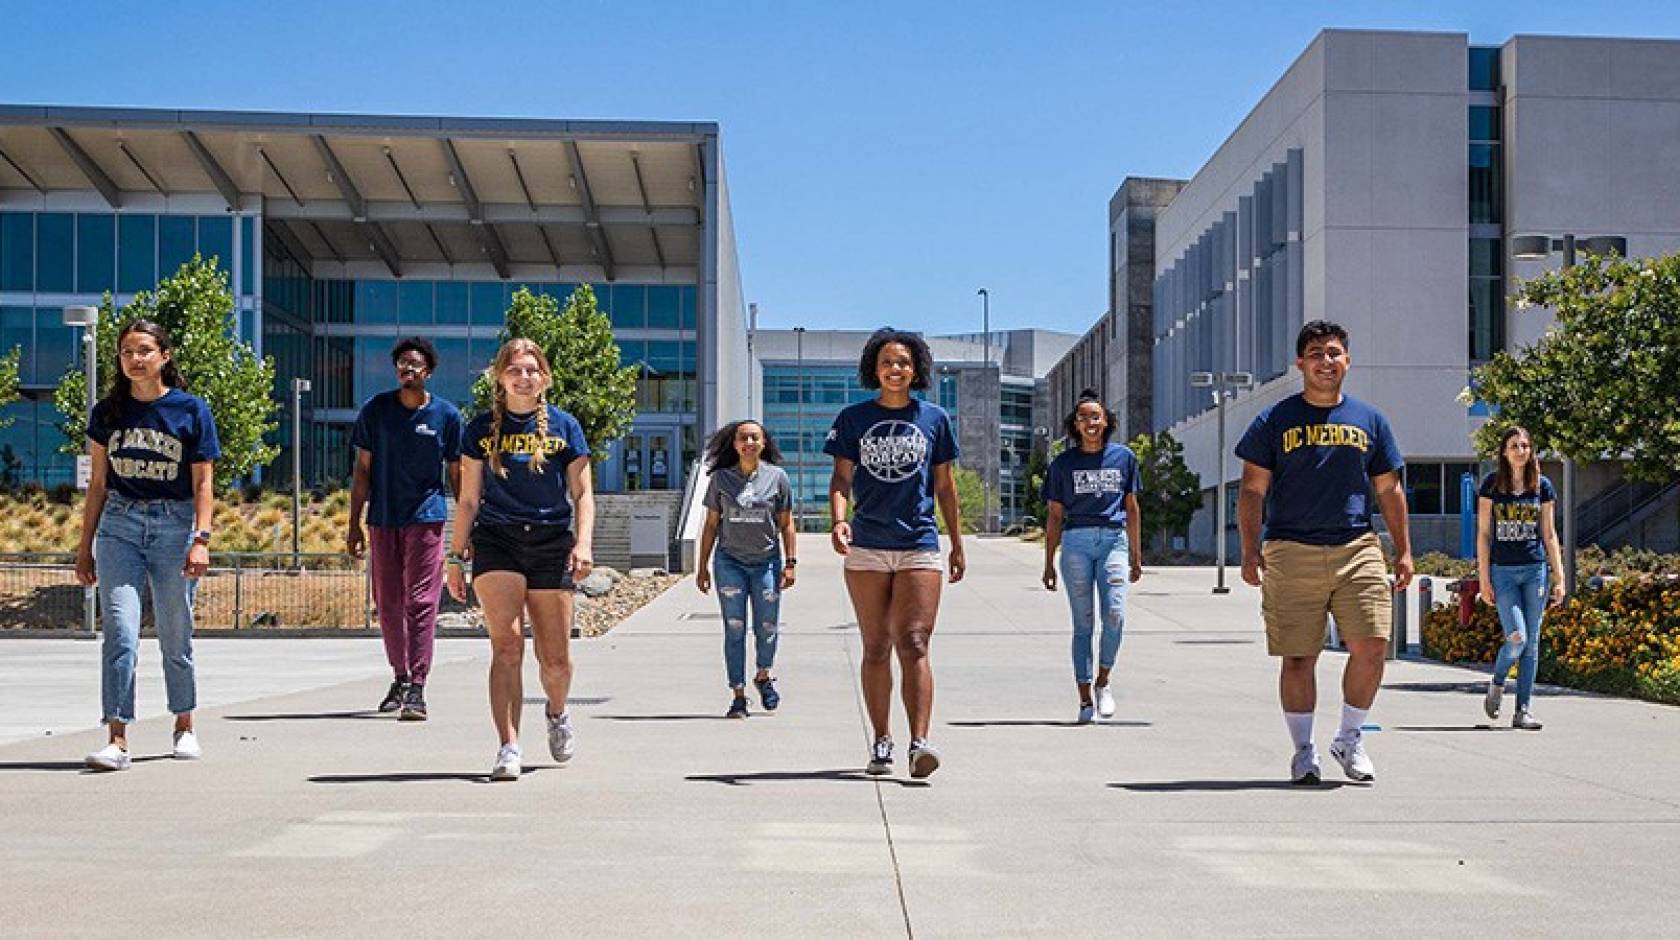 Students on the UC Merced campus